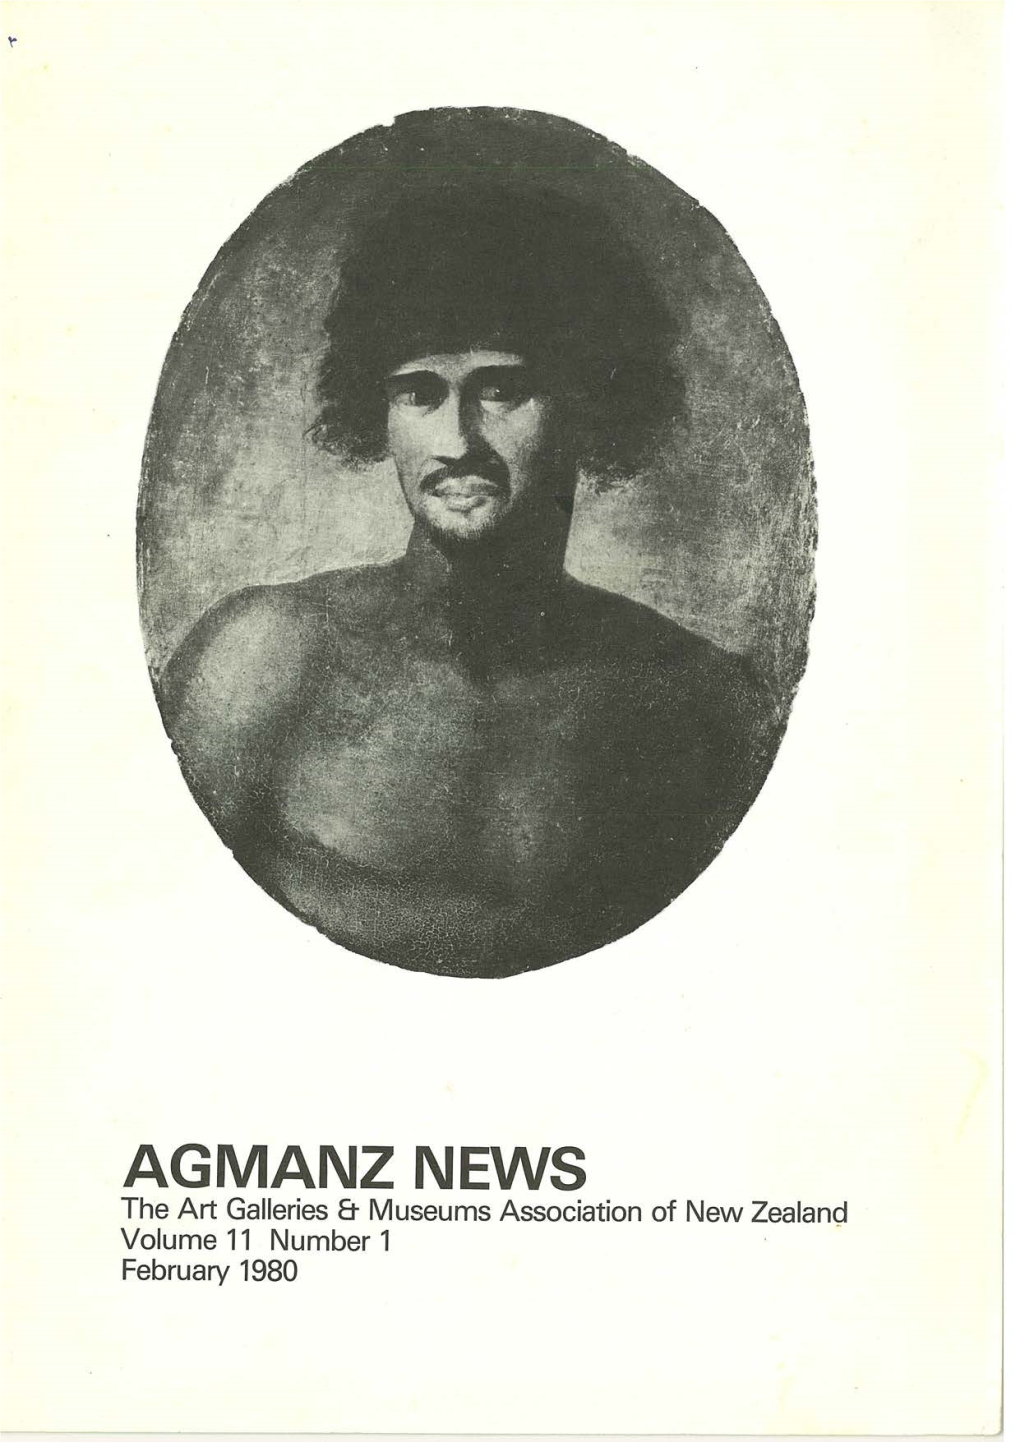 AGMANZ NEWS the Art Galleries Er Museums Association of New Zealand Volume 11 Number 1 February 1980 Cover TU, ARIKI of PARE; LATER POMARE L of TAHITI (D